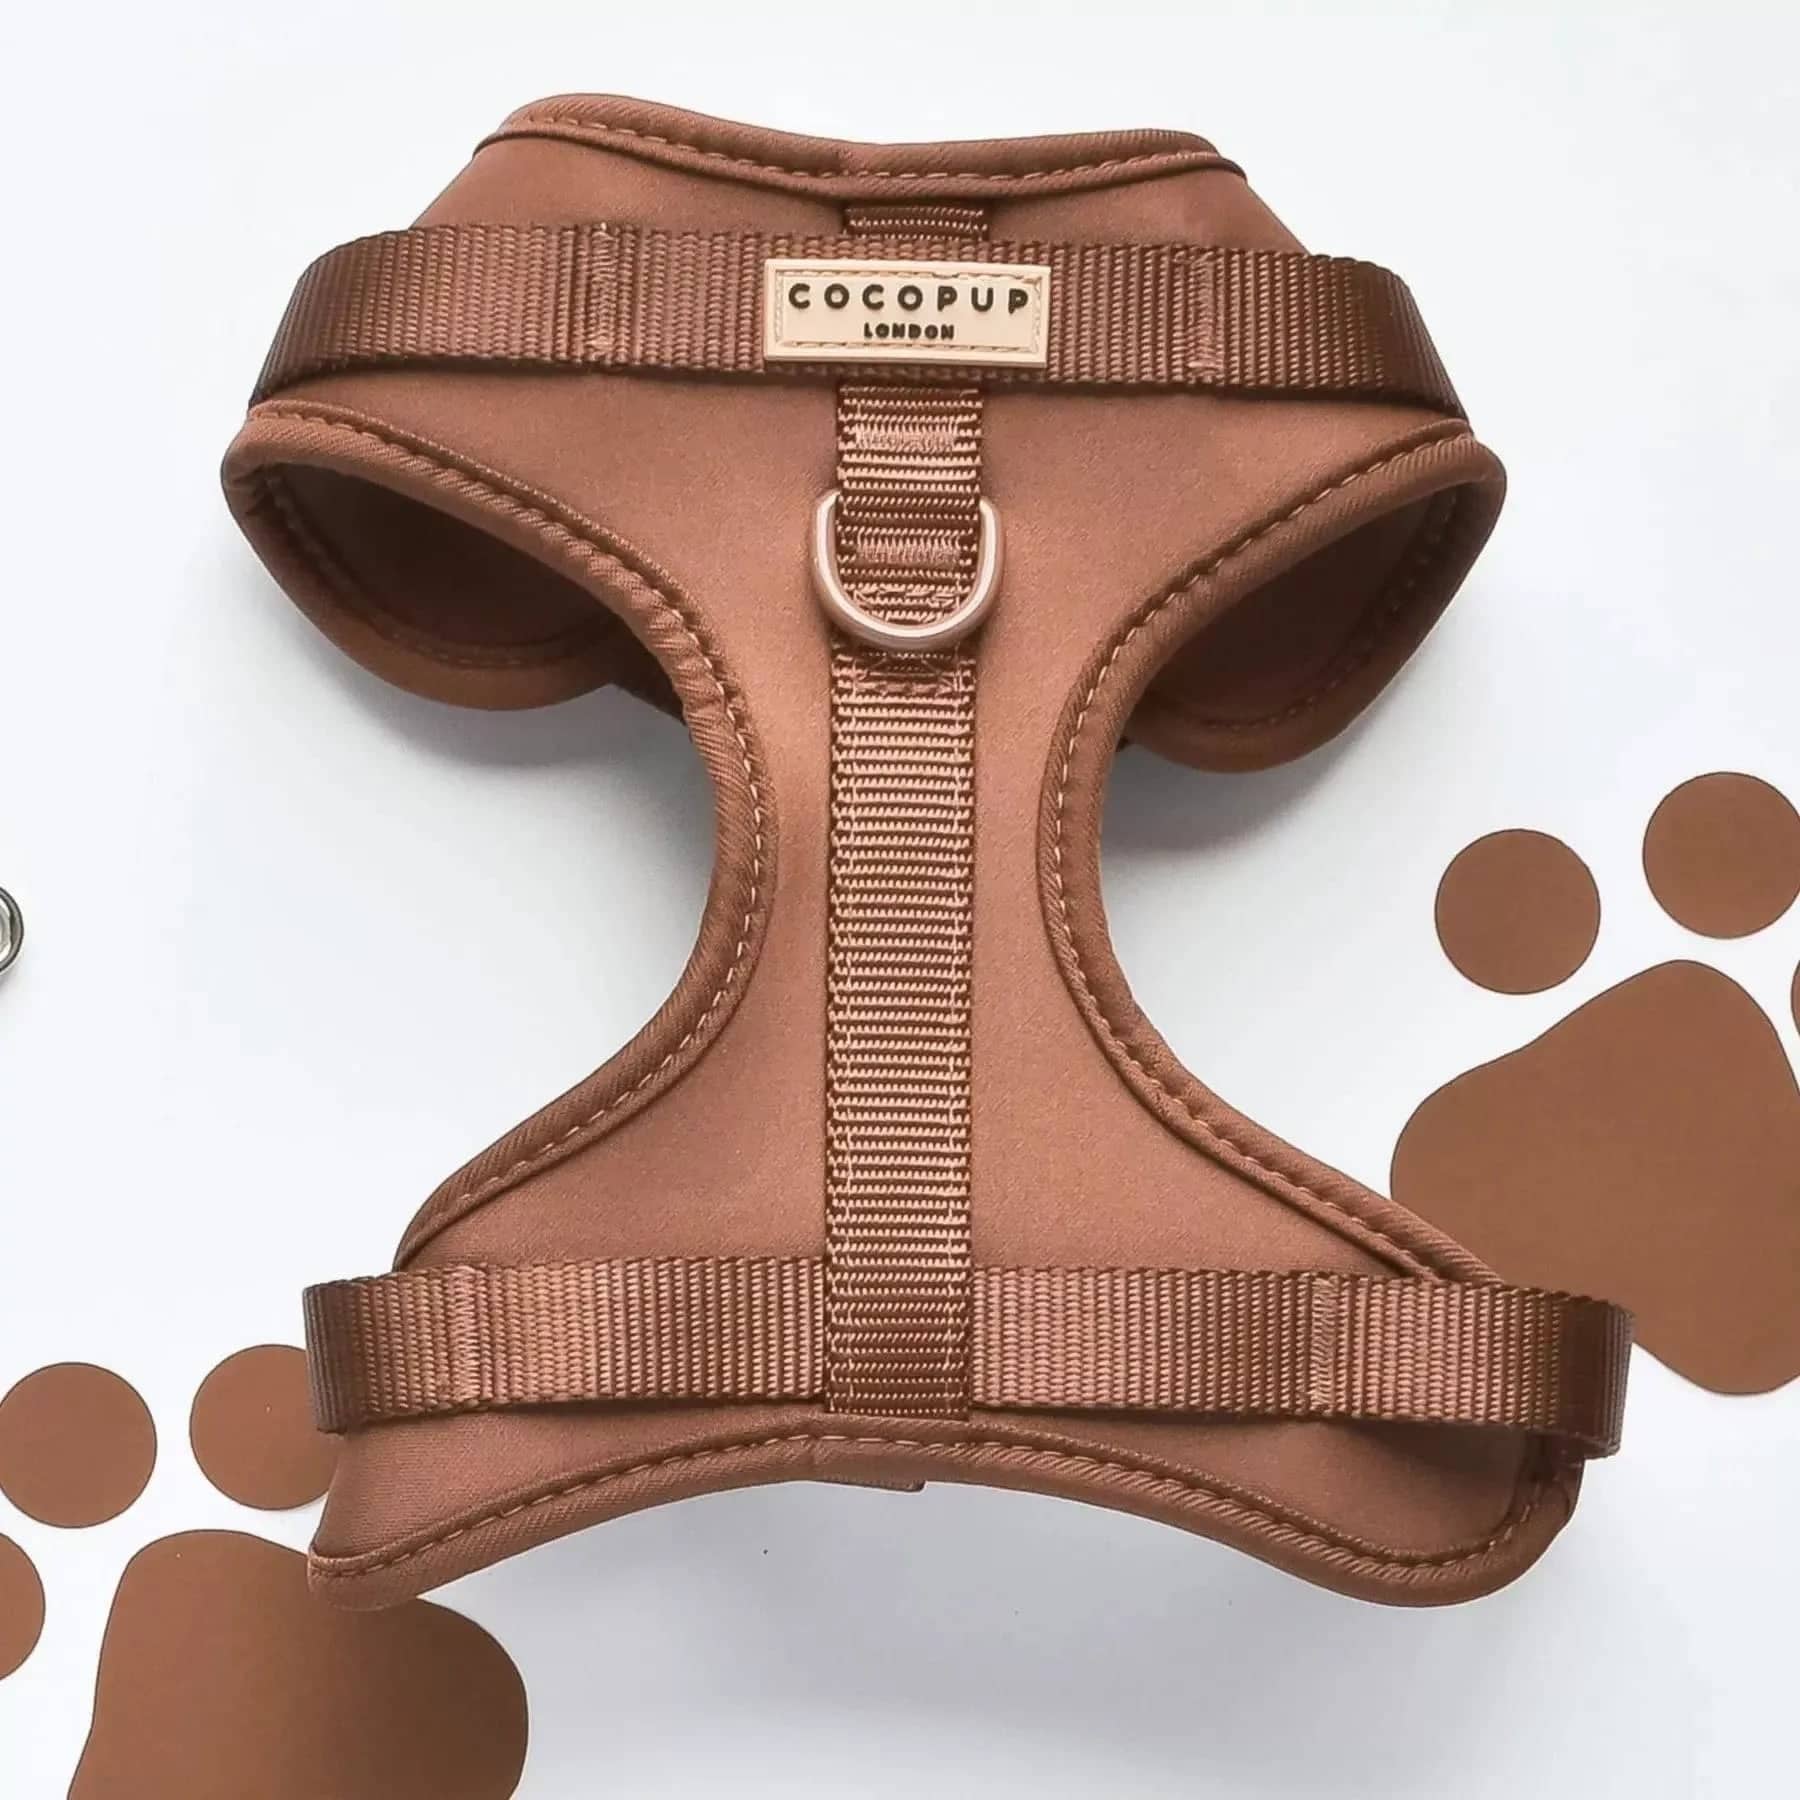 CocoPup London's Canine Harness with safety locking feature